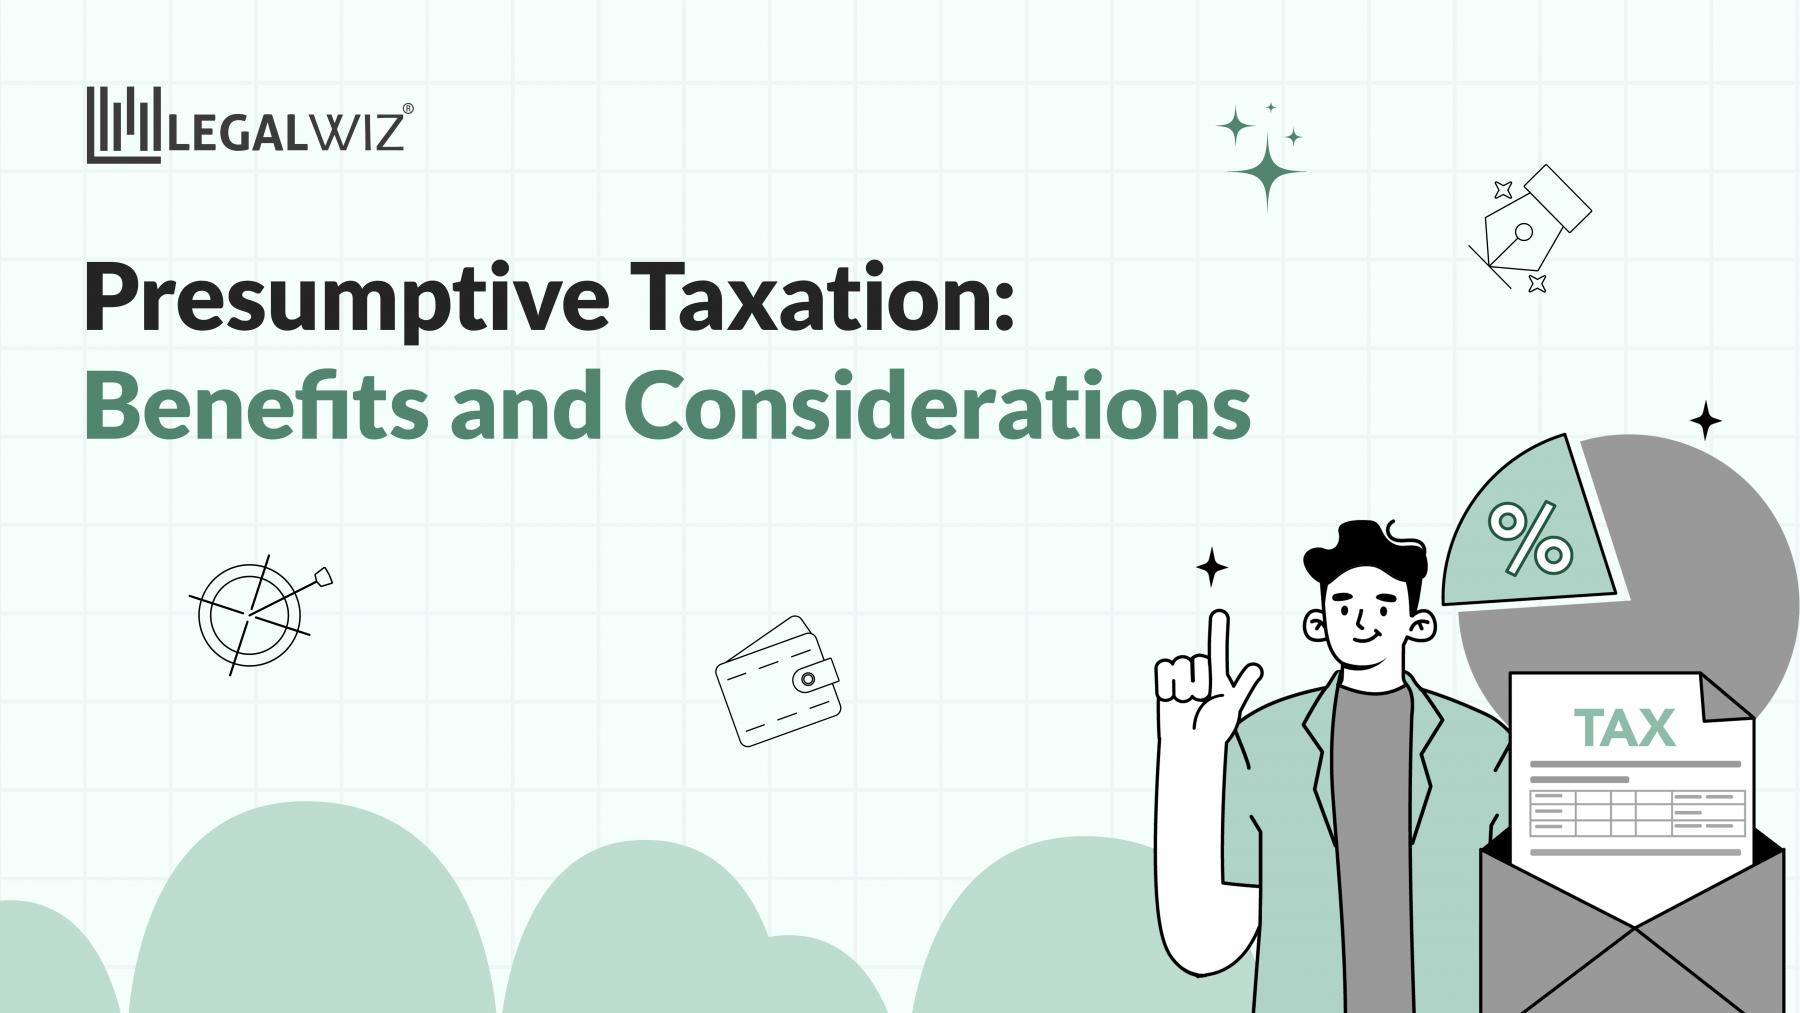 Presumptive Taxation: Benefits and Considerations